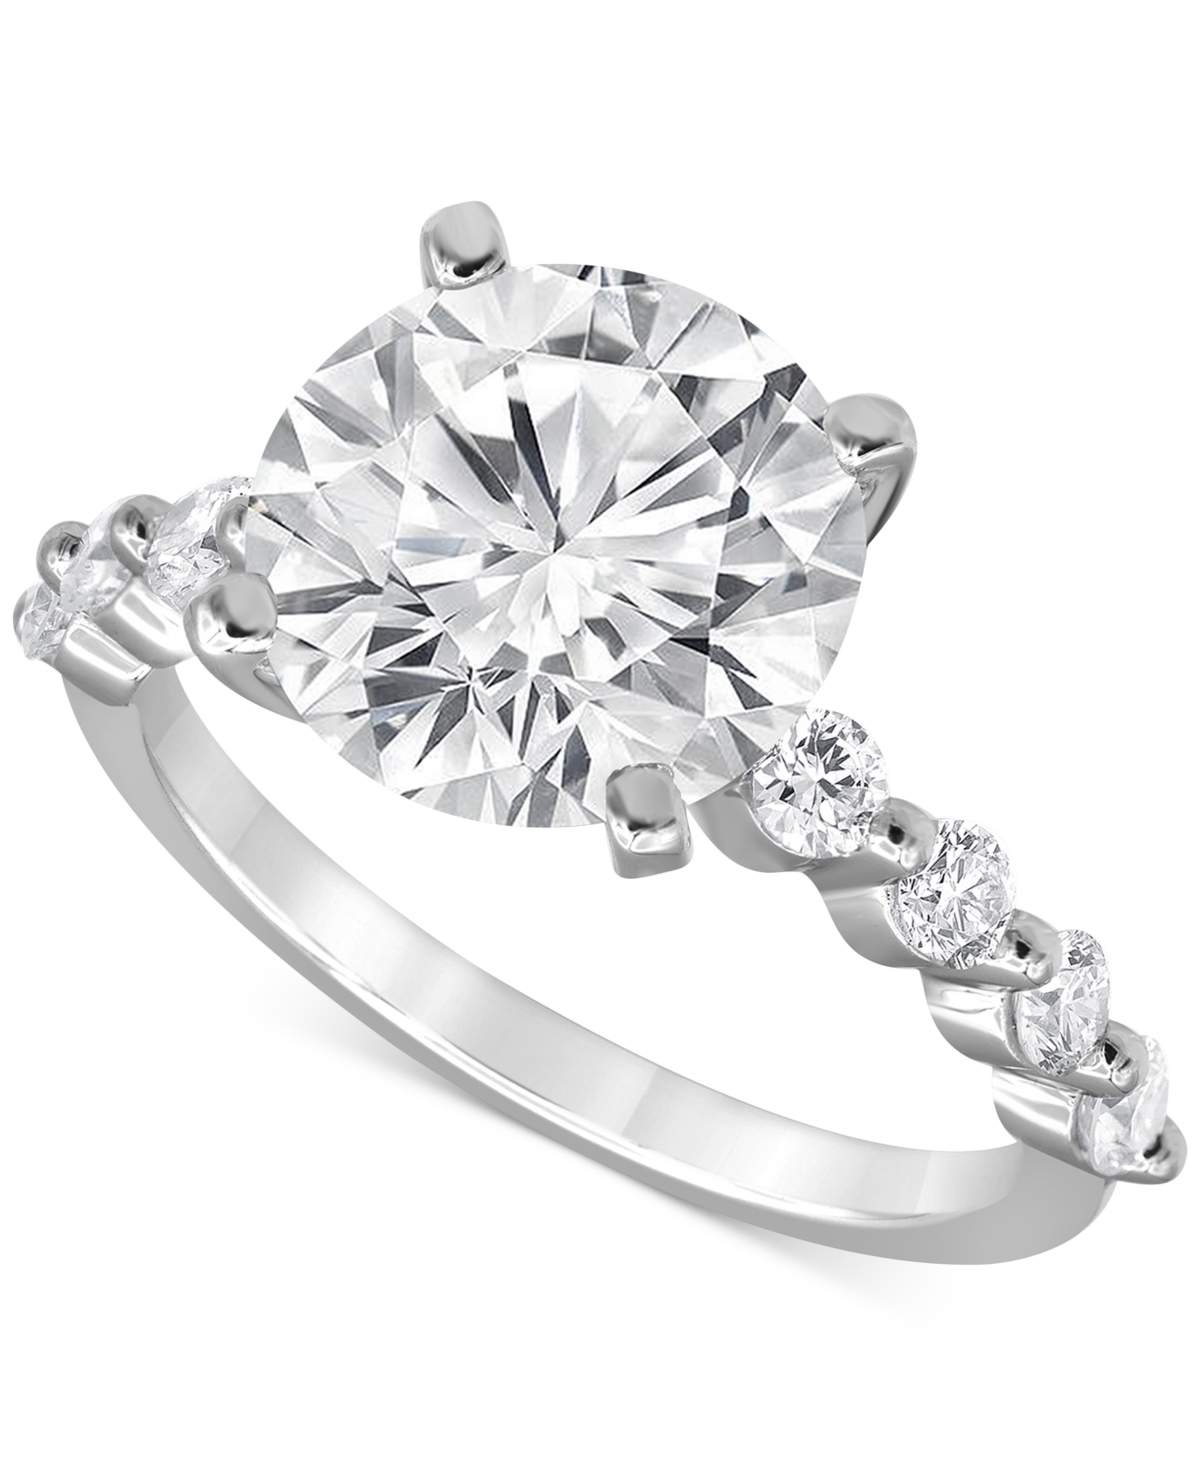 Certified Lab Grown Diamond Engagement Ring (4-1/2 ct. t.w.) in 14k White Gold - White Gold